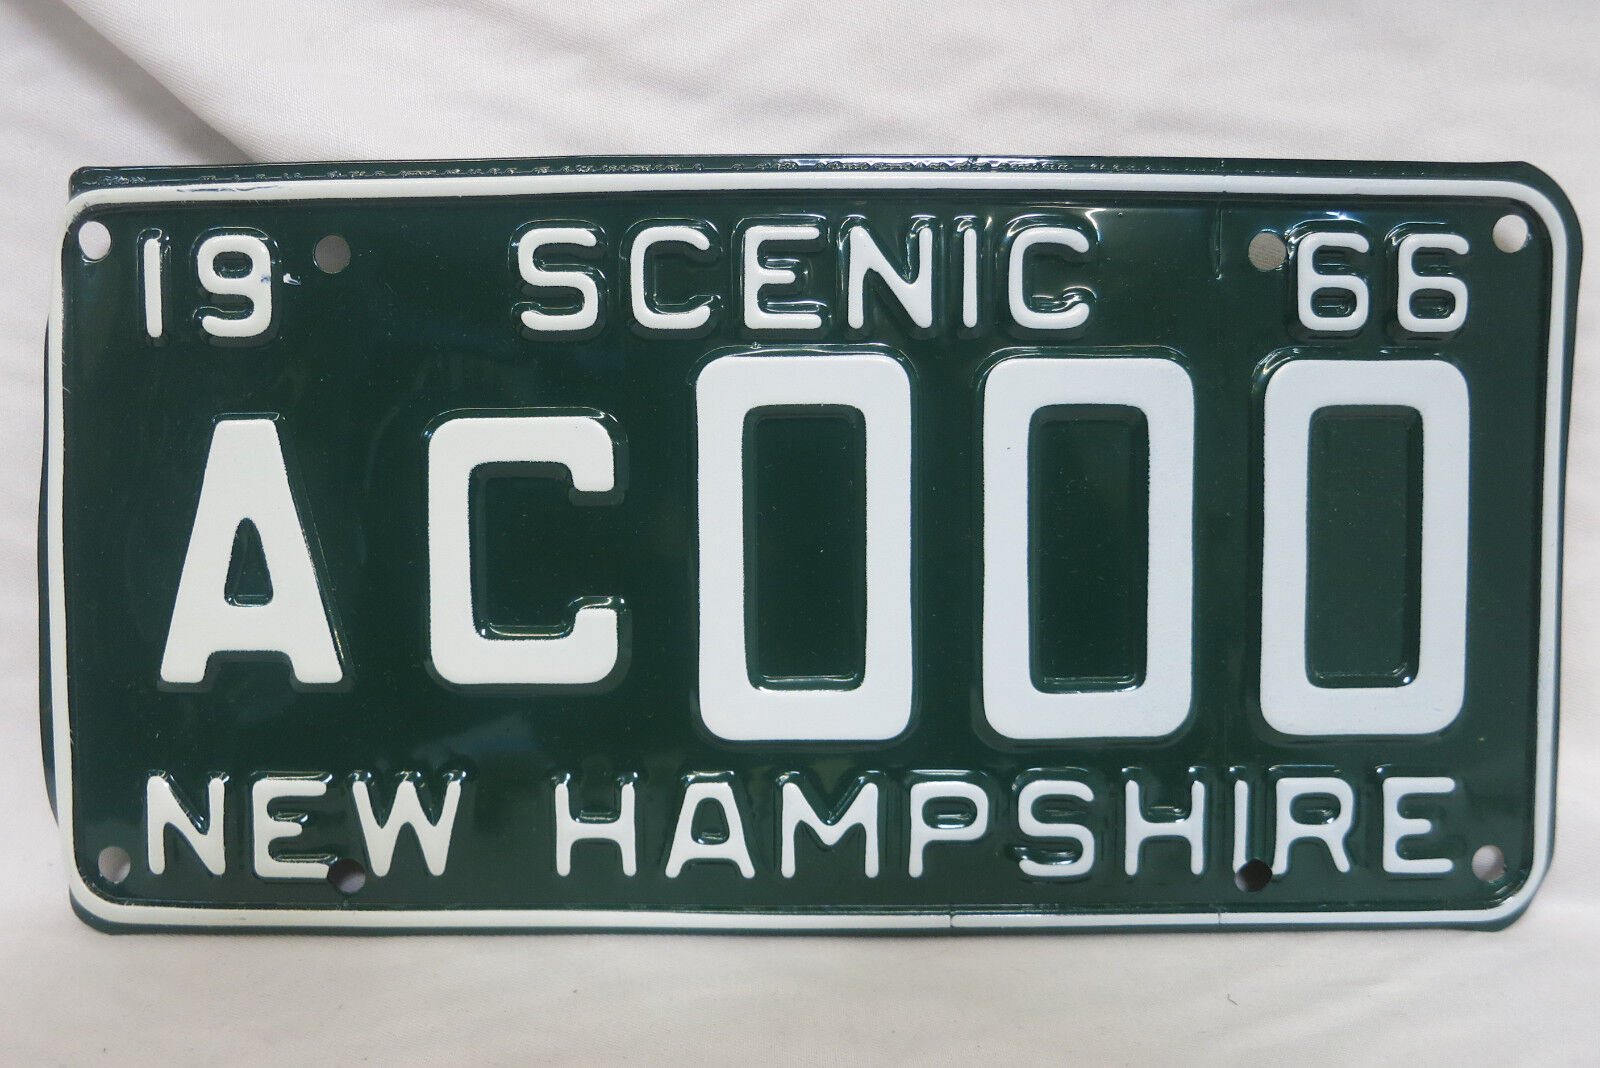 Original 1966 New Hampshire License Plate from 20th Century-Fox Films Archives